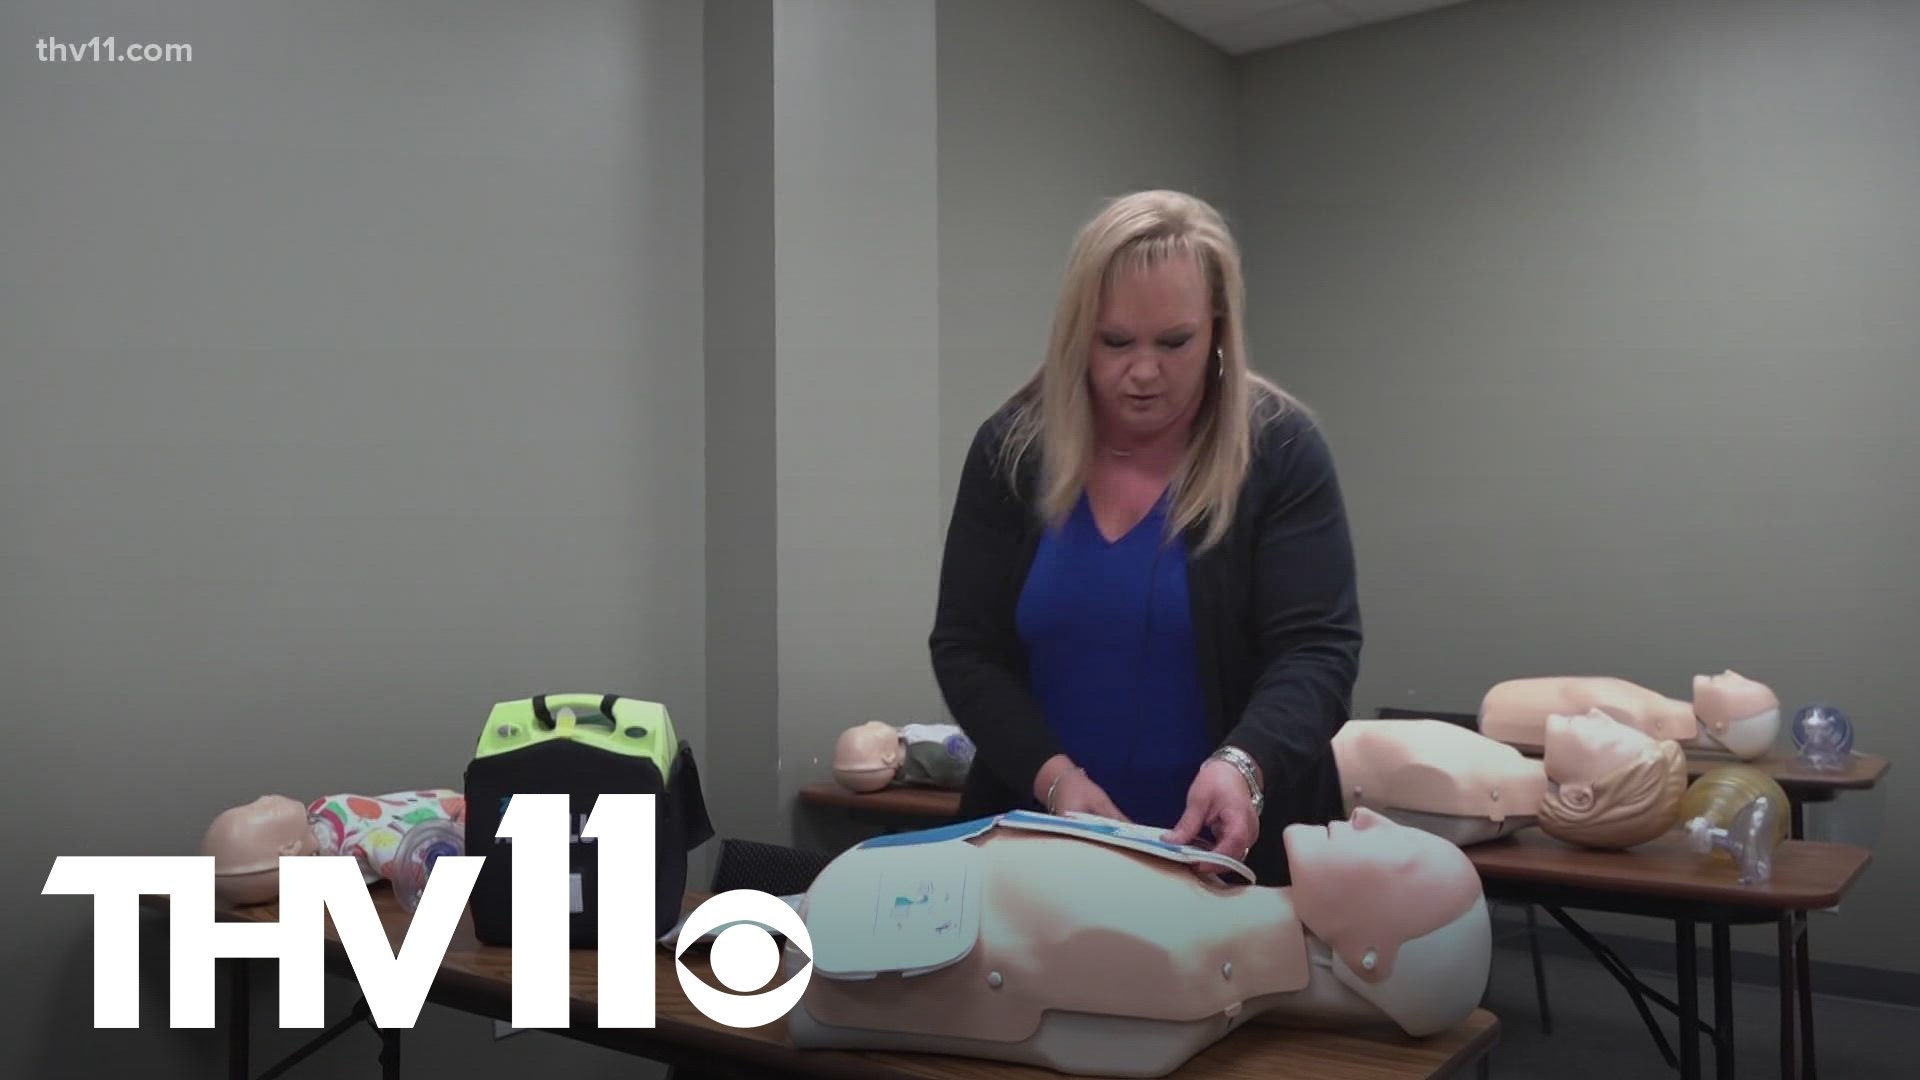 One nurse in Arkansas shares what you should do in the event of an emergency, and the importance of being trained in CPR.